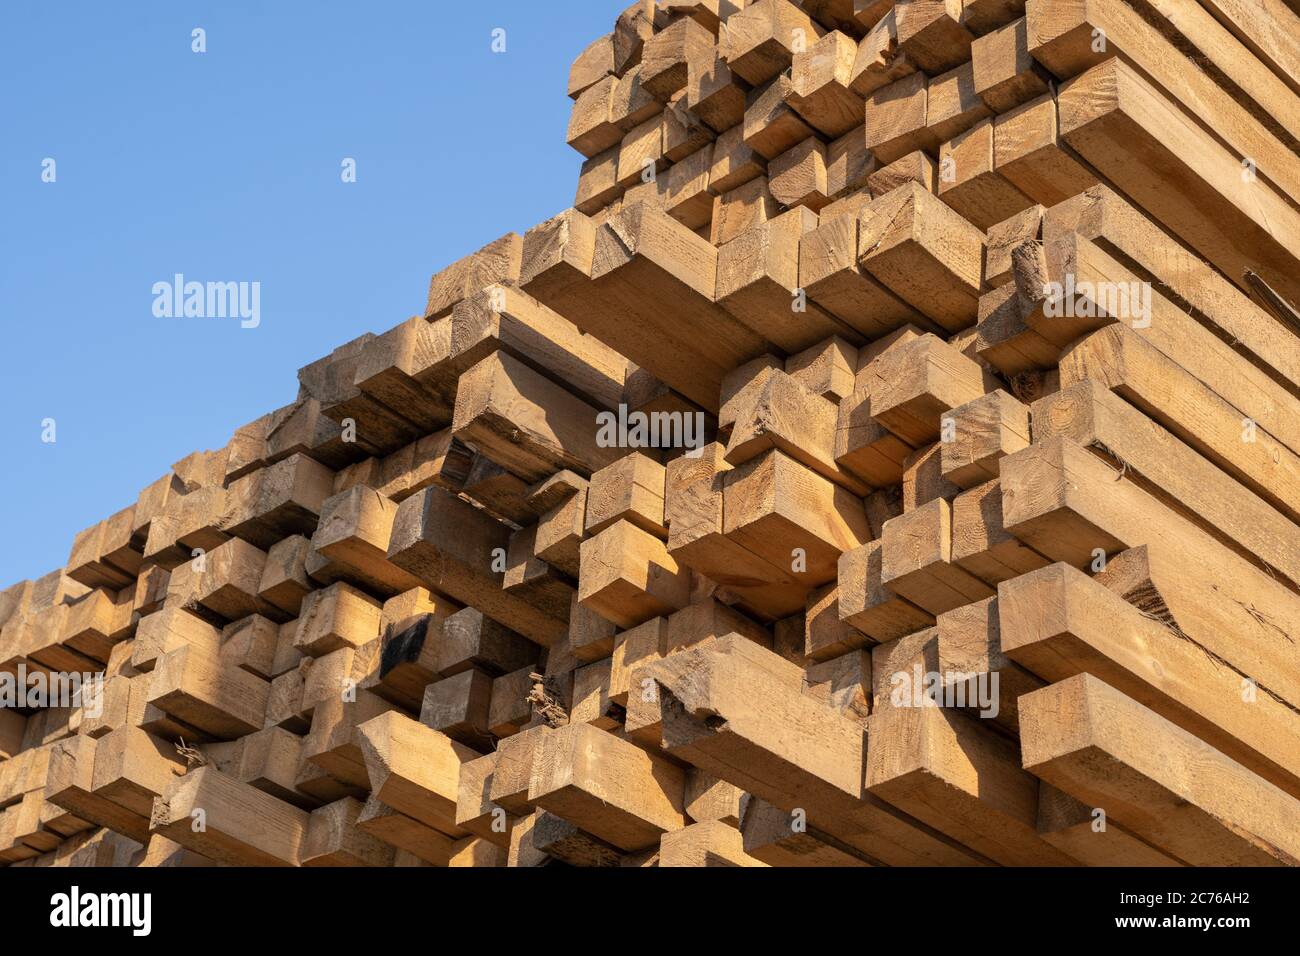 Wooden boards, lumber, industrial wood, timber. Pine wood timber stack of natural rough wooden boards on building site. Industrial timber building Stock Photo